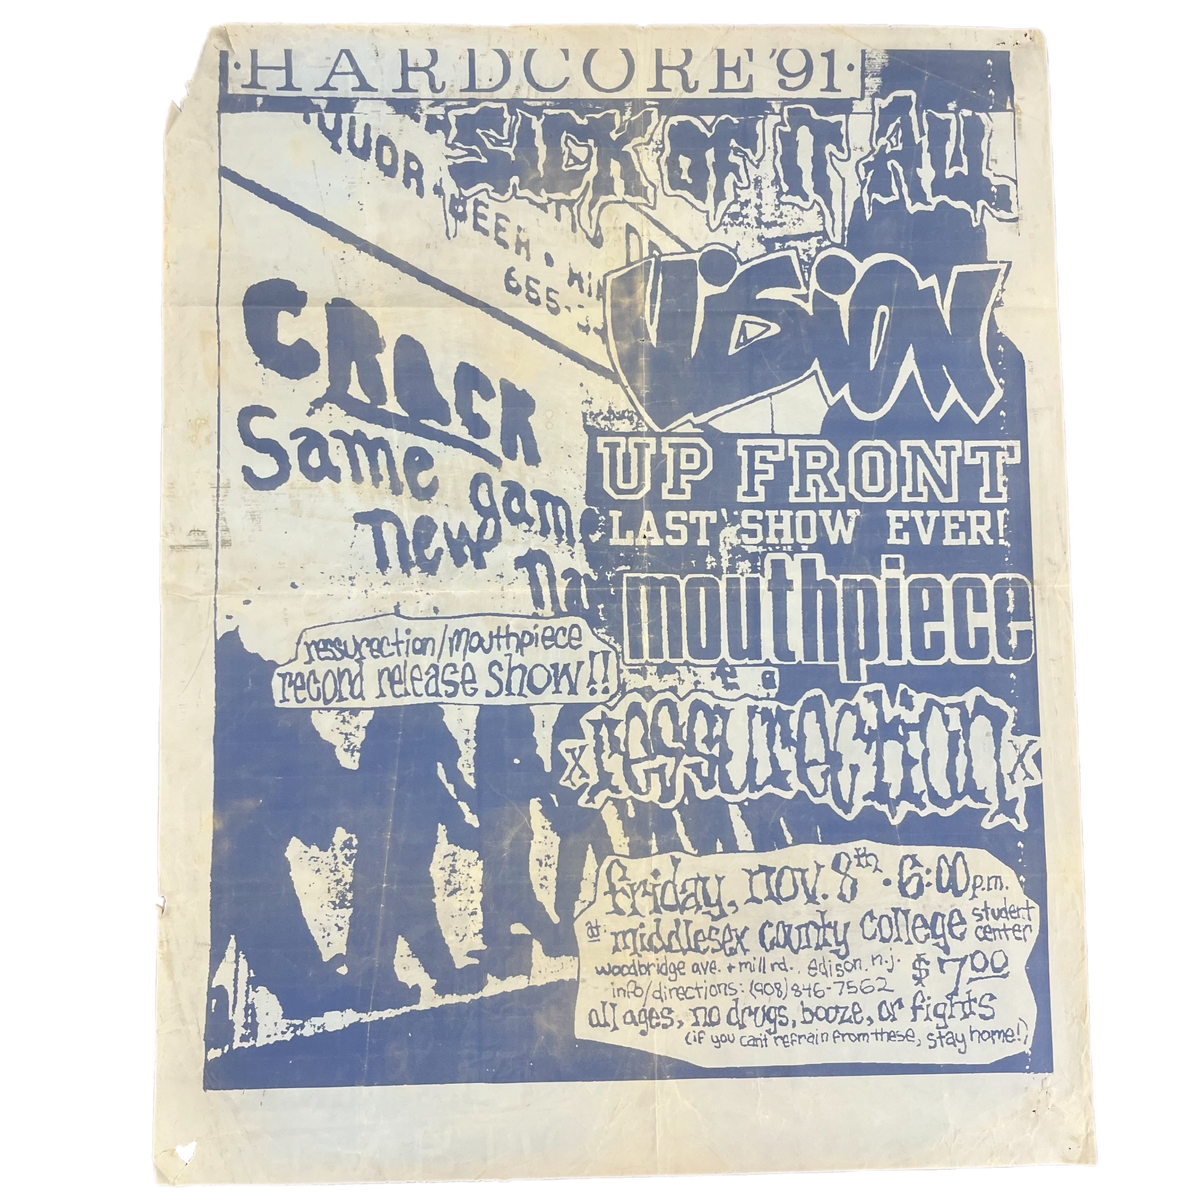 Vintage Sick Of It All Up Front Last Show &quot;Mouthpiece Record Release&quot; Show Poster